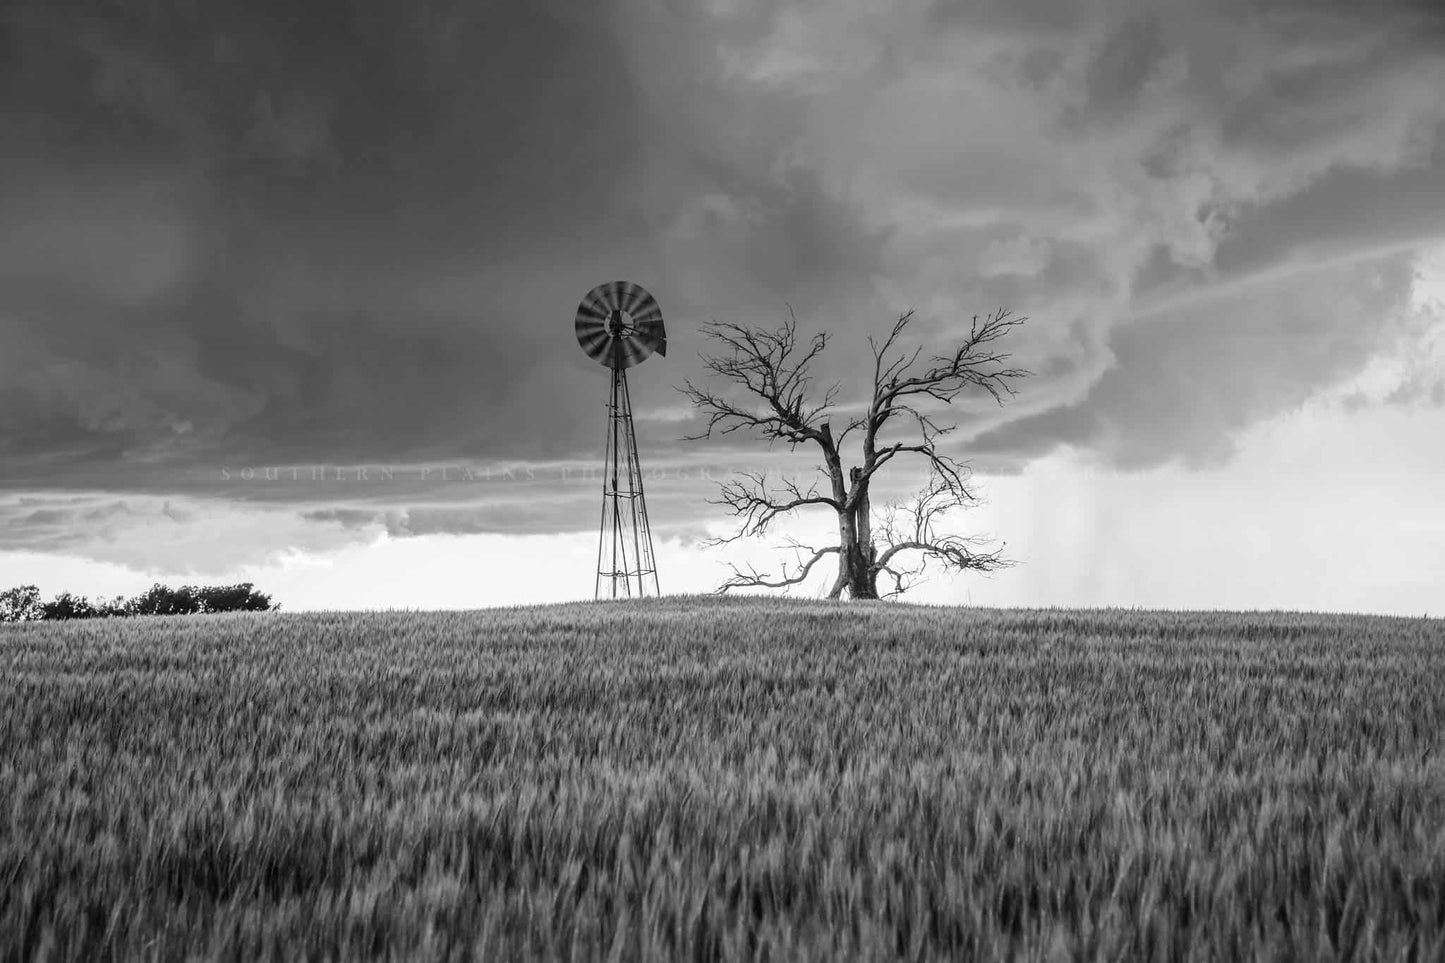 Black and white country photography print of an old windmill and dead tree on a rise in a wheat field as a storm approaches on a spring day in Oklahoma by Sean Ramsey of Southern Plains Photography.